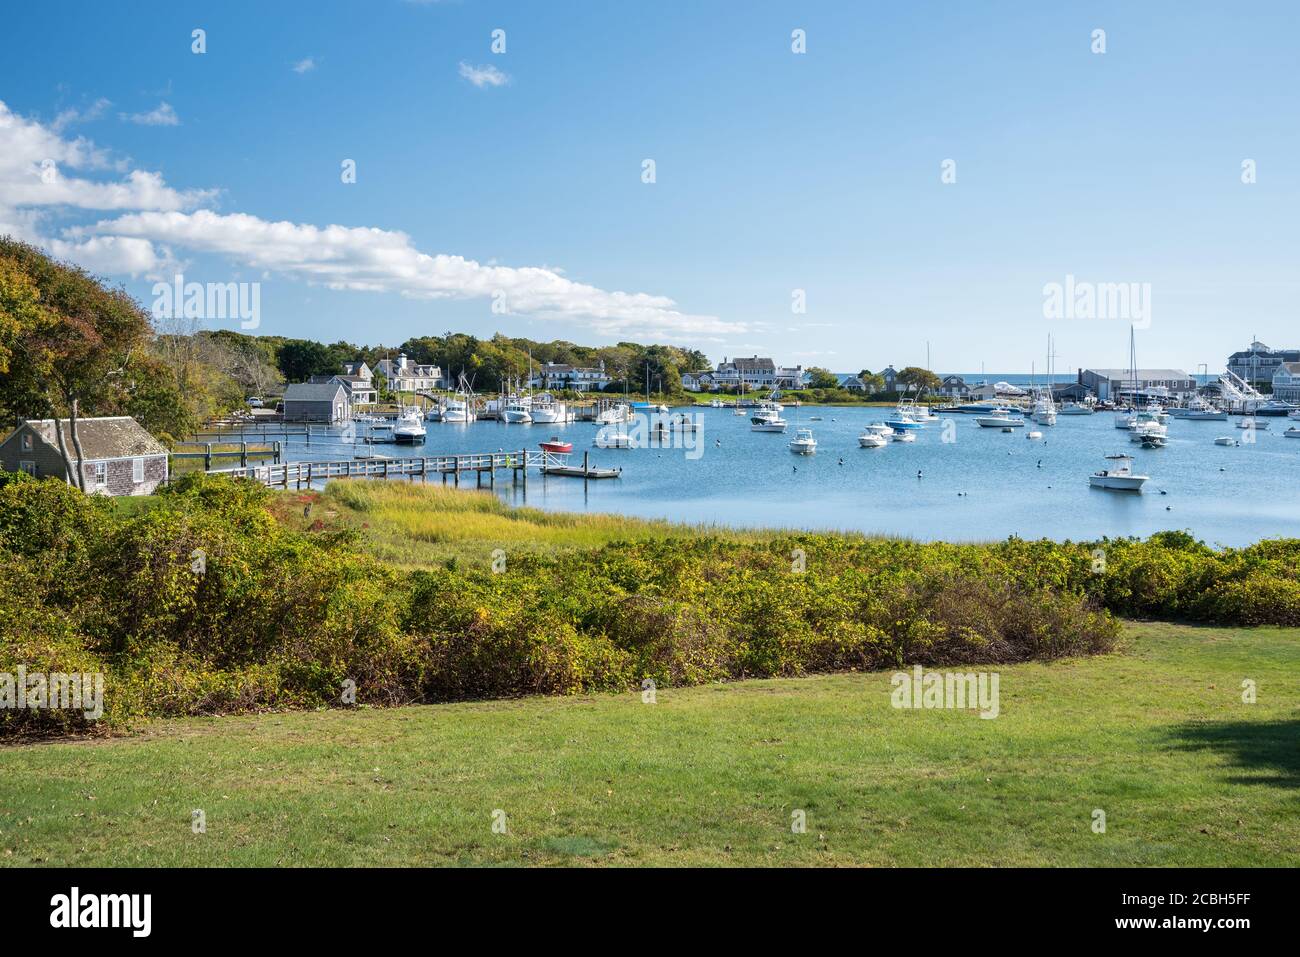 Boats anchored in a beautiful natural harbour on a sunny autumn day Stock Photo